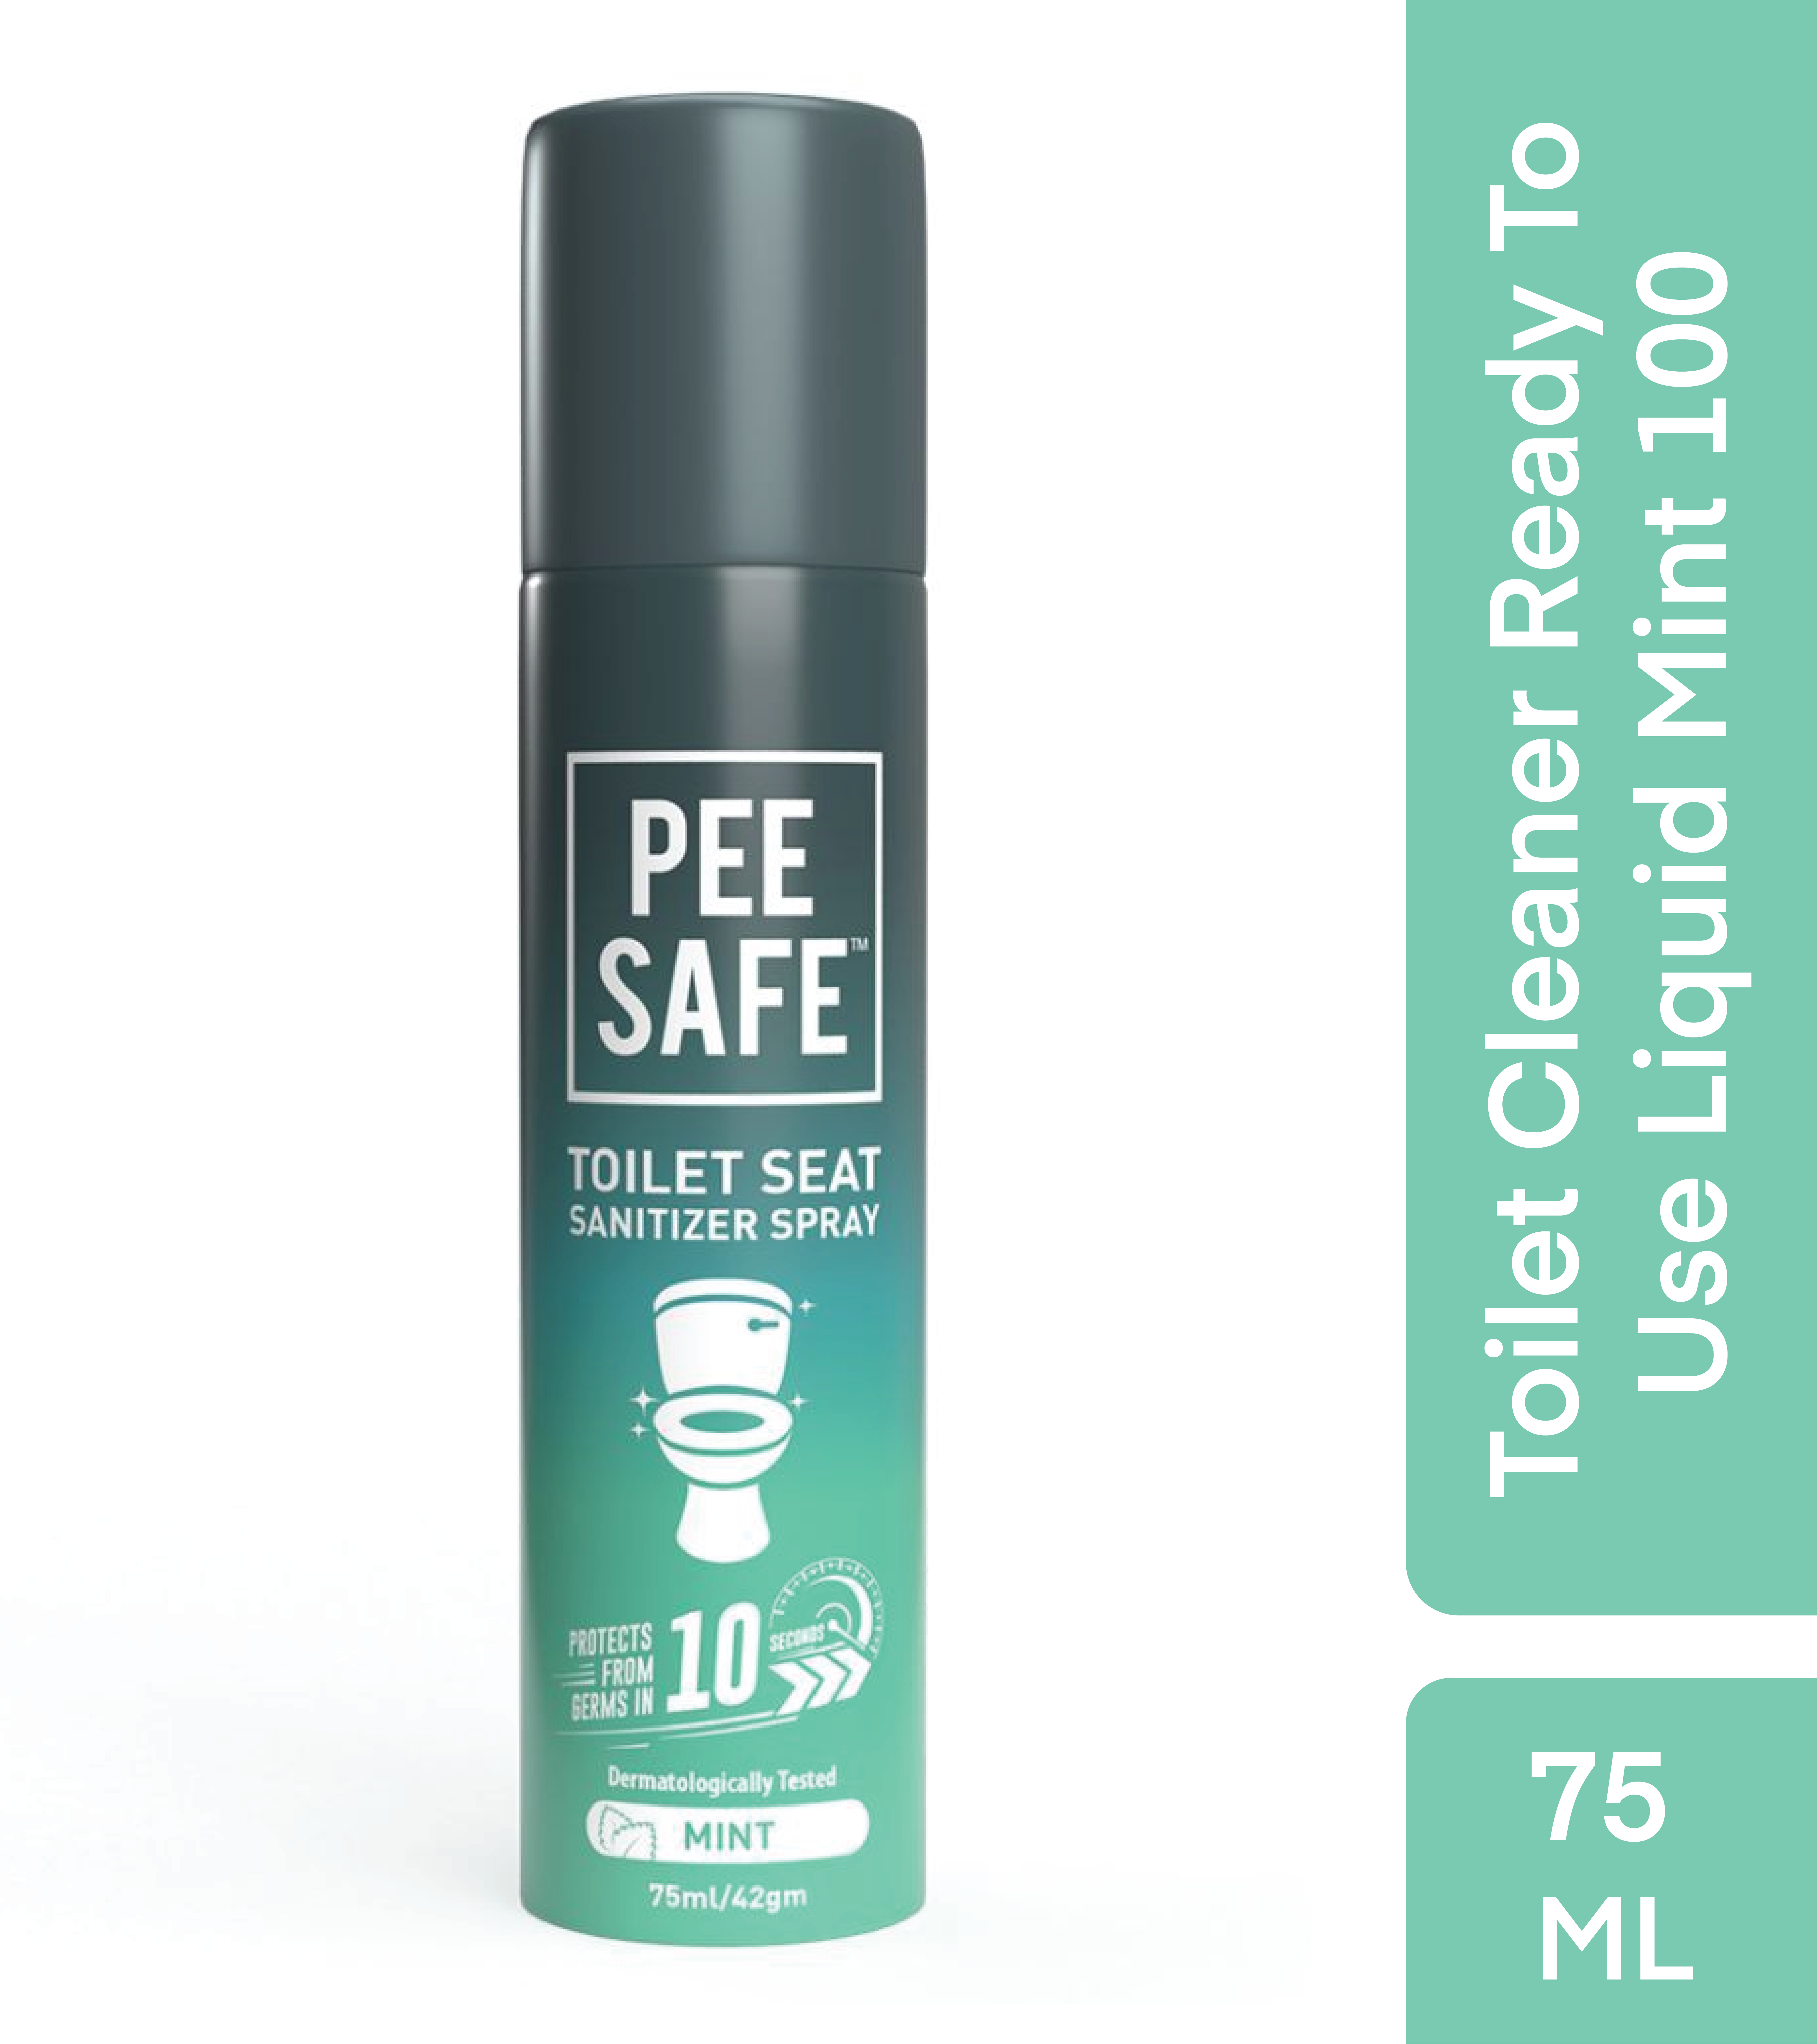 Pee Safe Toilet Seat Sanitizer Spray (75 ml) - Mint Reduces The Risk of UTI & Other Infections Kills 99.9% Germs & Travel Friendly | Anti Odour, Deodorizer